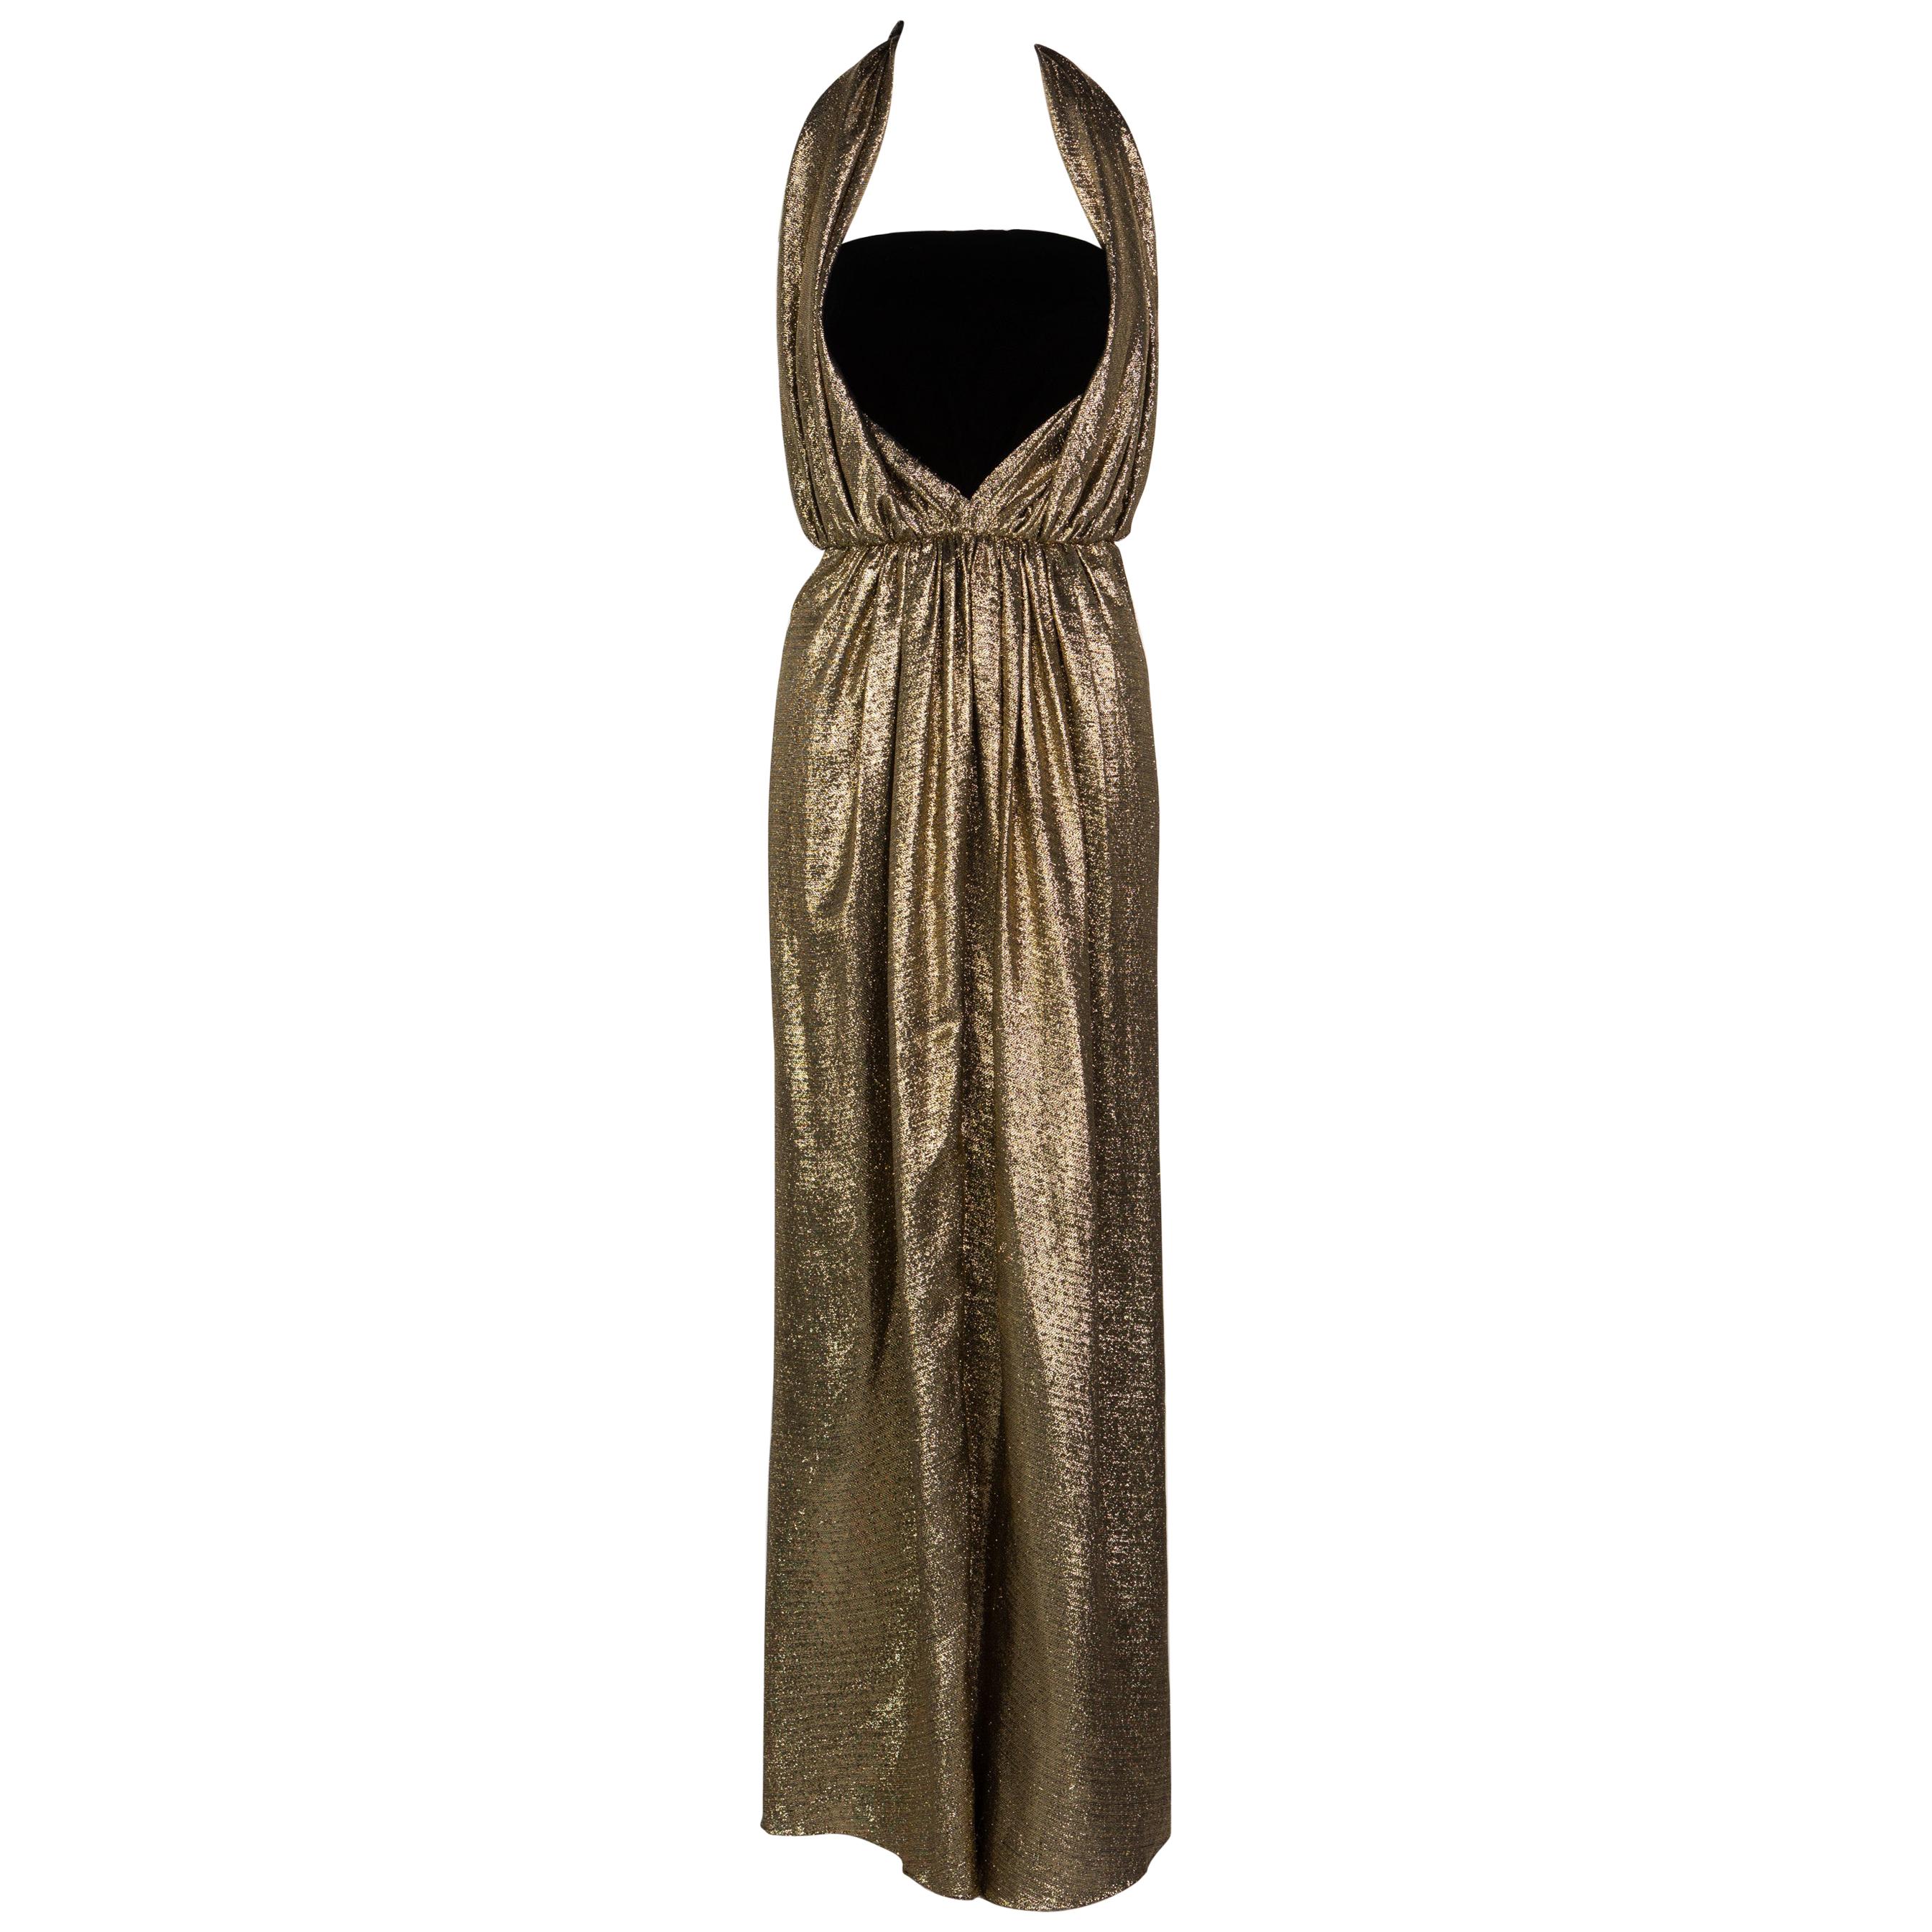 Game On Metallic Dress in Gold - Frock Candy